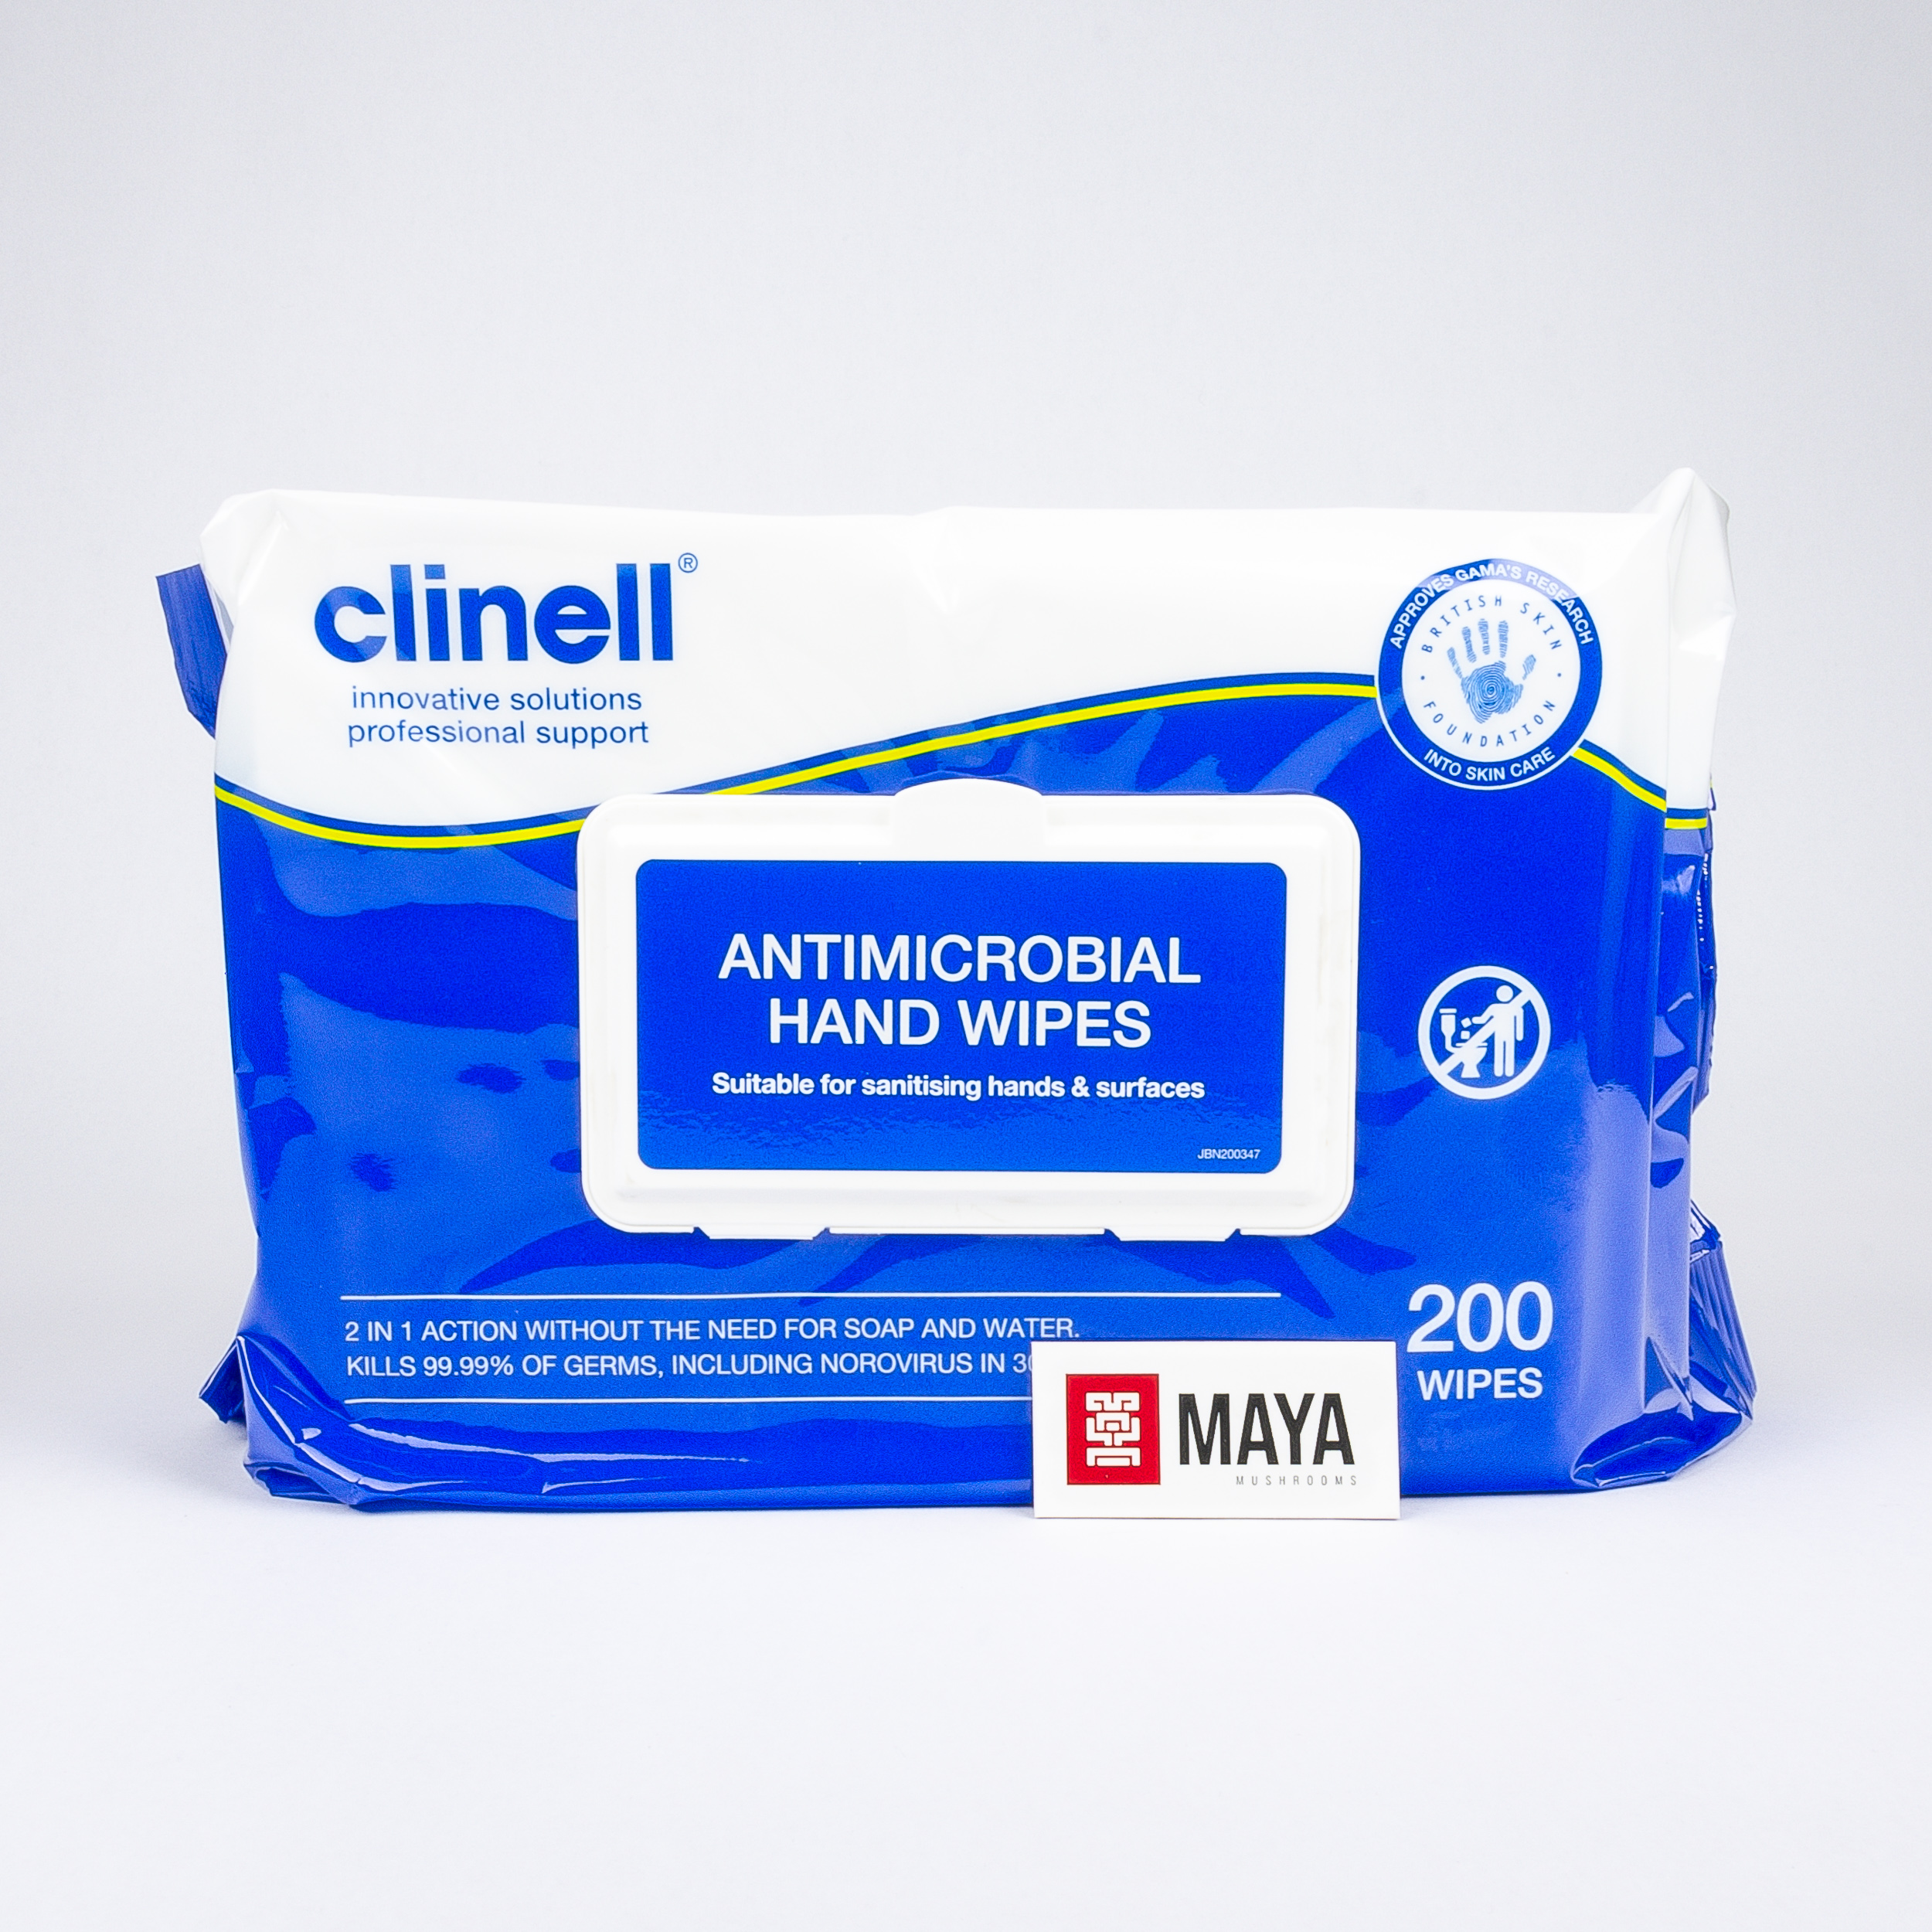 Clinell Antimicrobial Hand Wipes, 200 quantity. Closed Top View